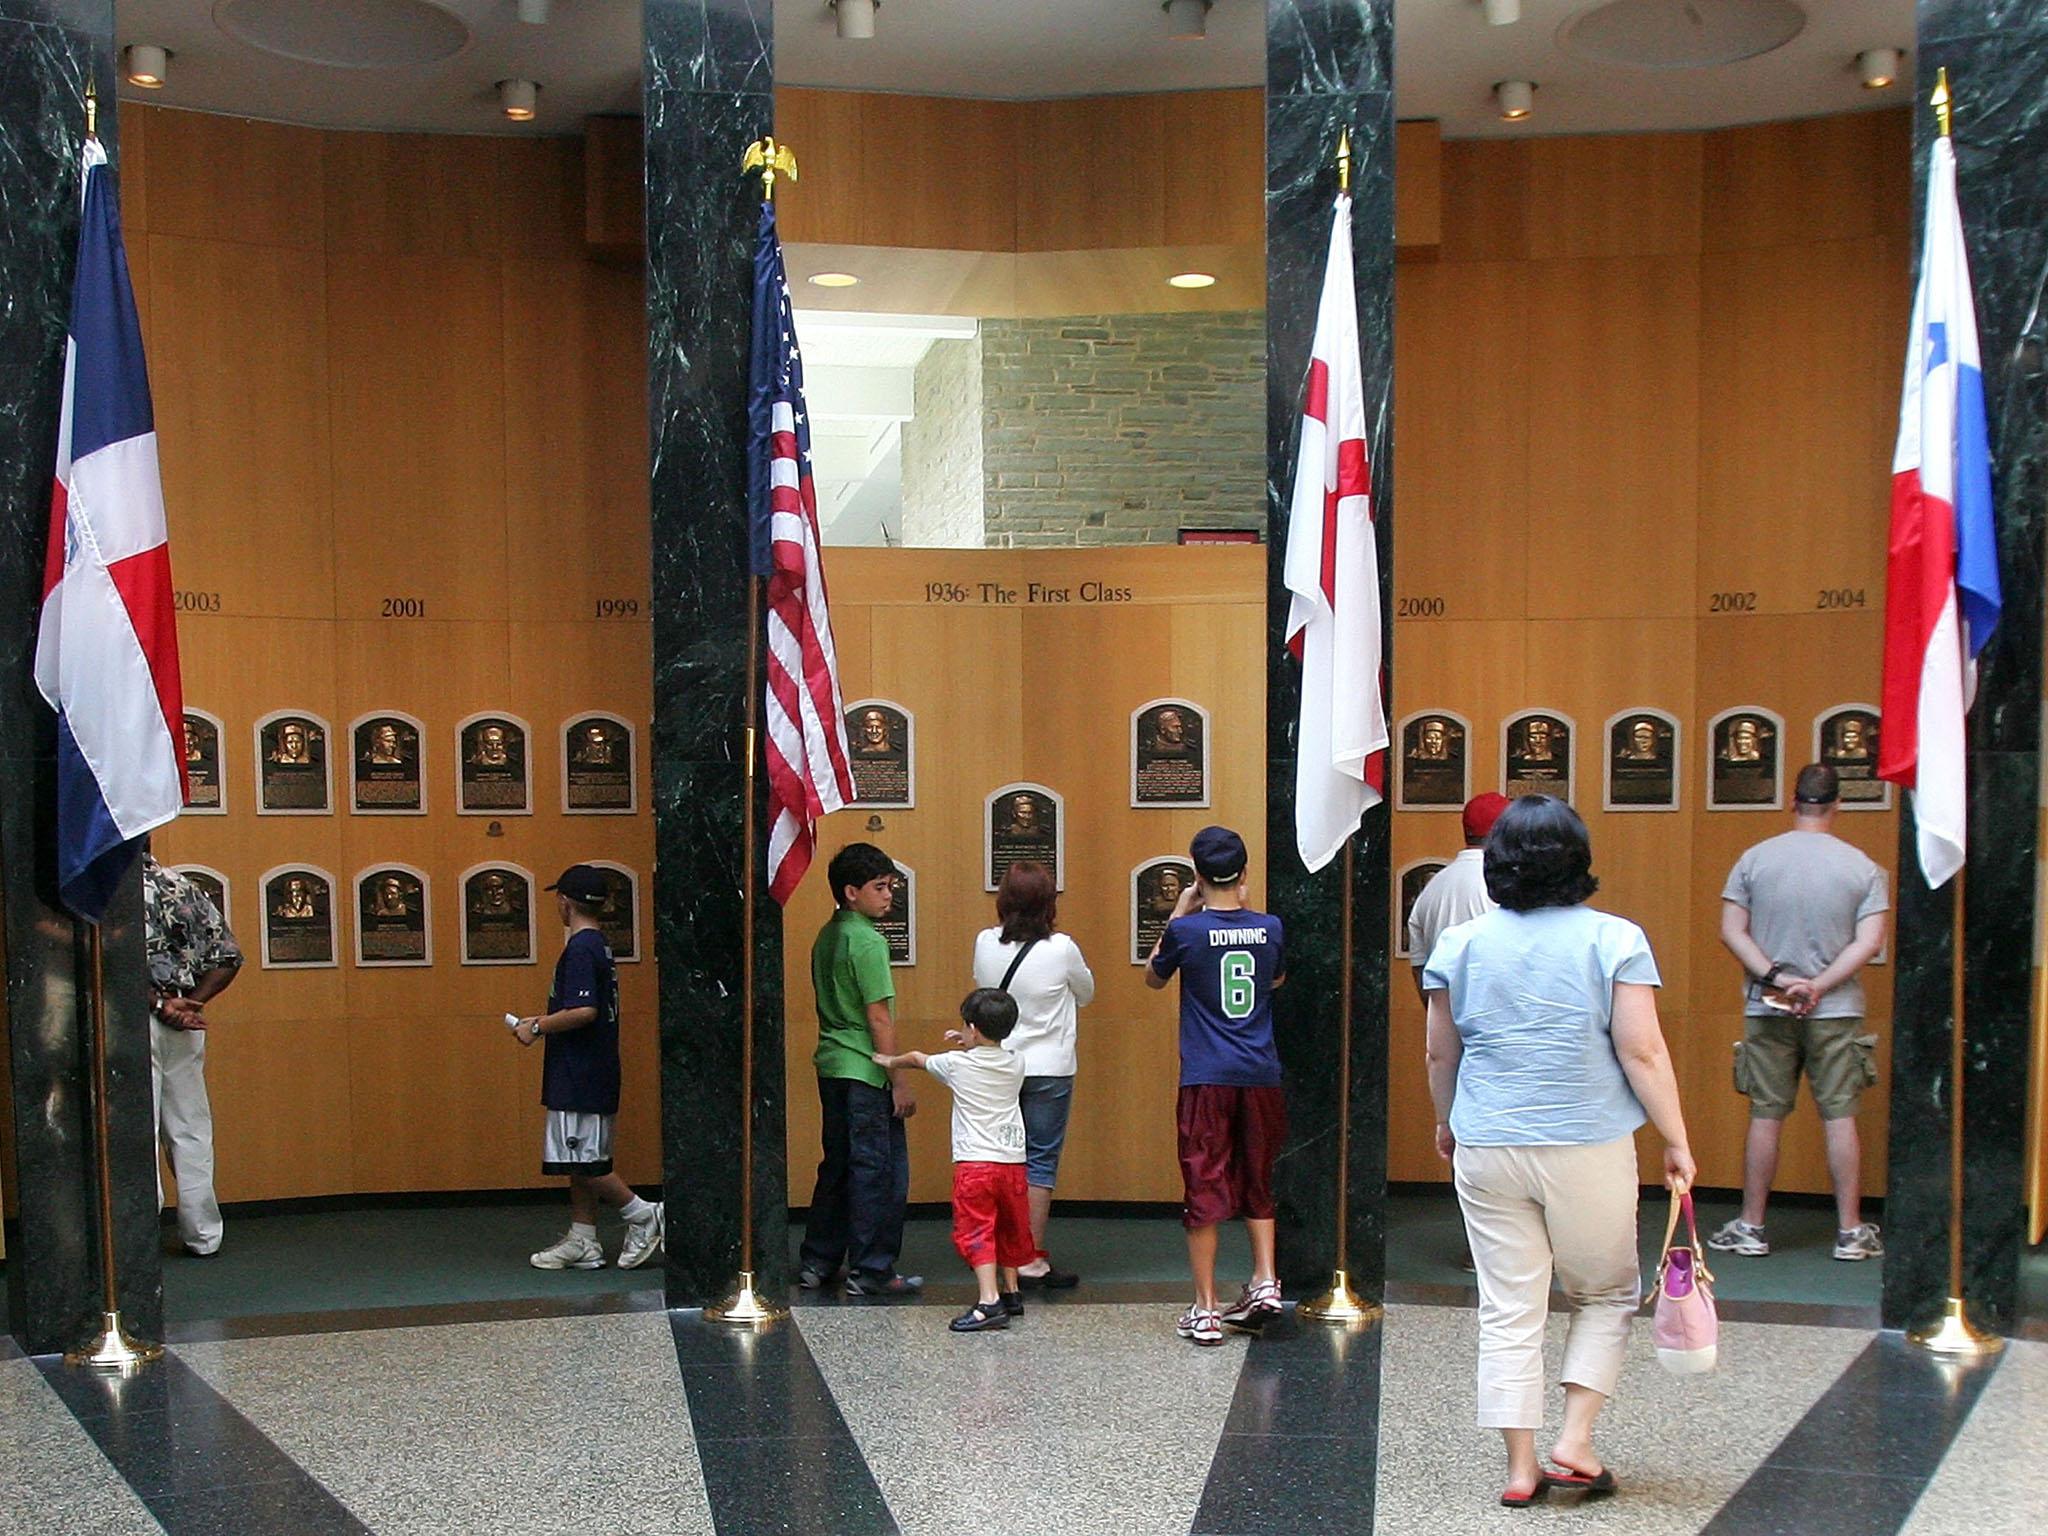 Fans look at the plaques of players inducted into the National Baseball Hall of Fame and Museum in New York